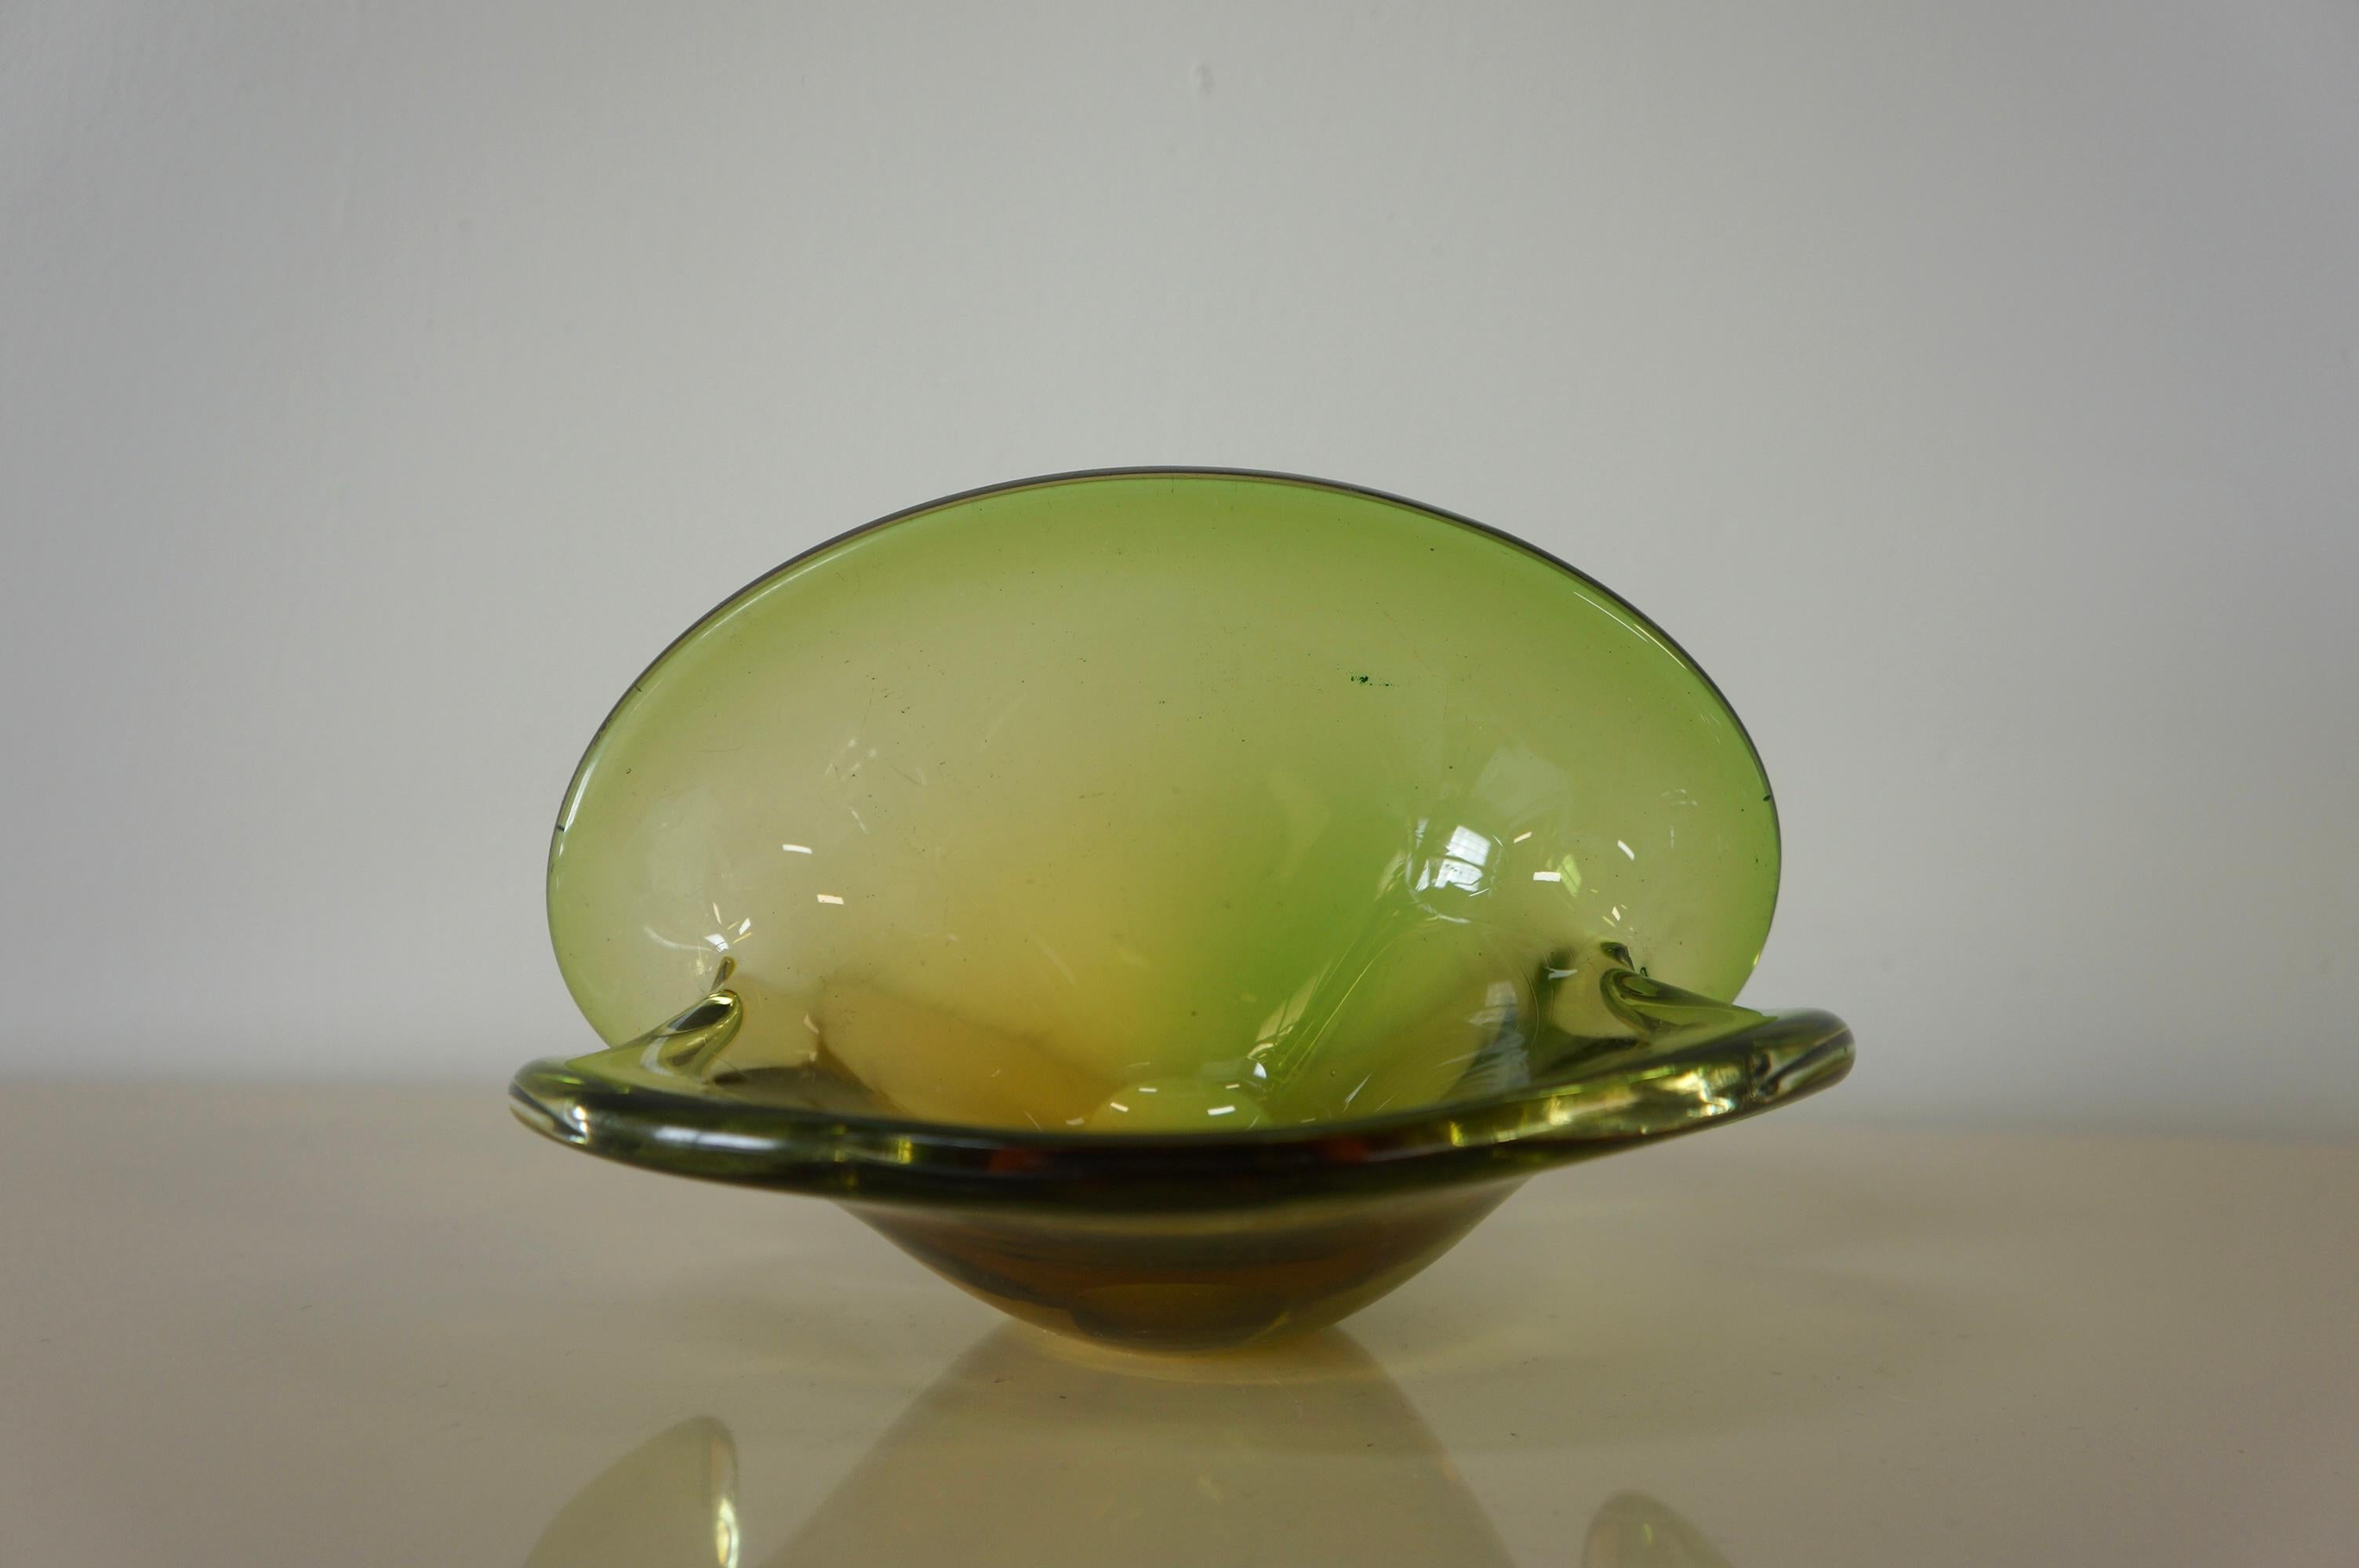 Transparent Green art glass Archimede Seguso decorative bowl made by Murano. This striking decorative bowl resembles the shape of a clam. It was designed by Archimede Seguso and made in the 1960s in Murano, Italy. The transparent green art glass